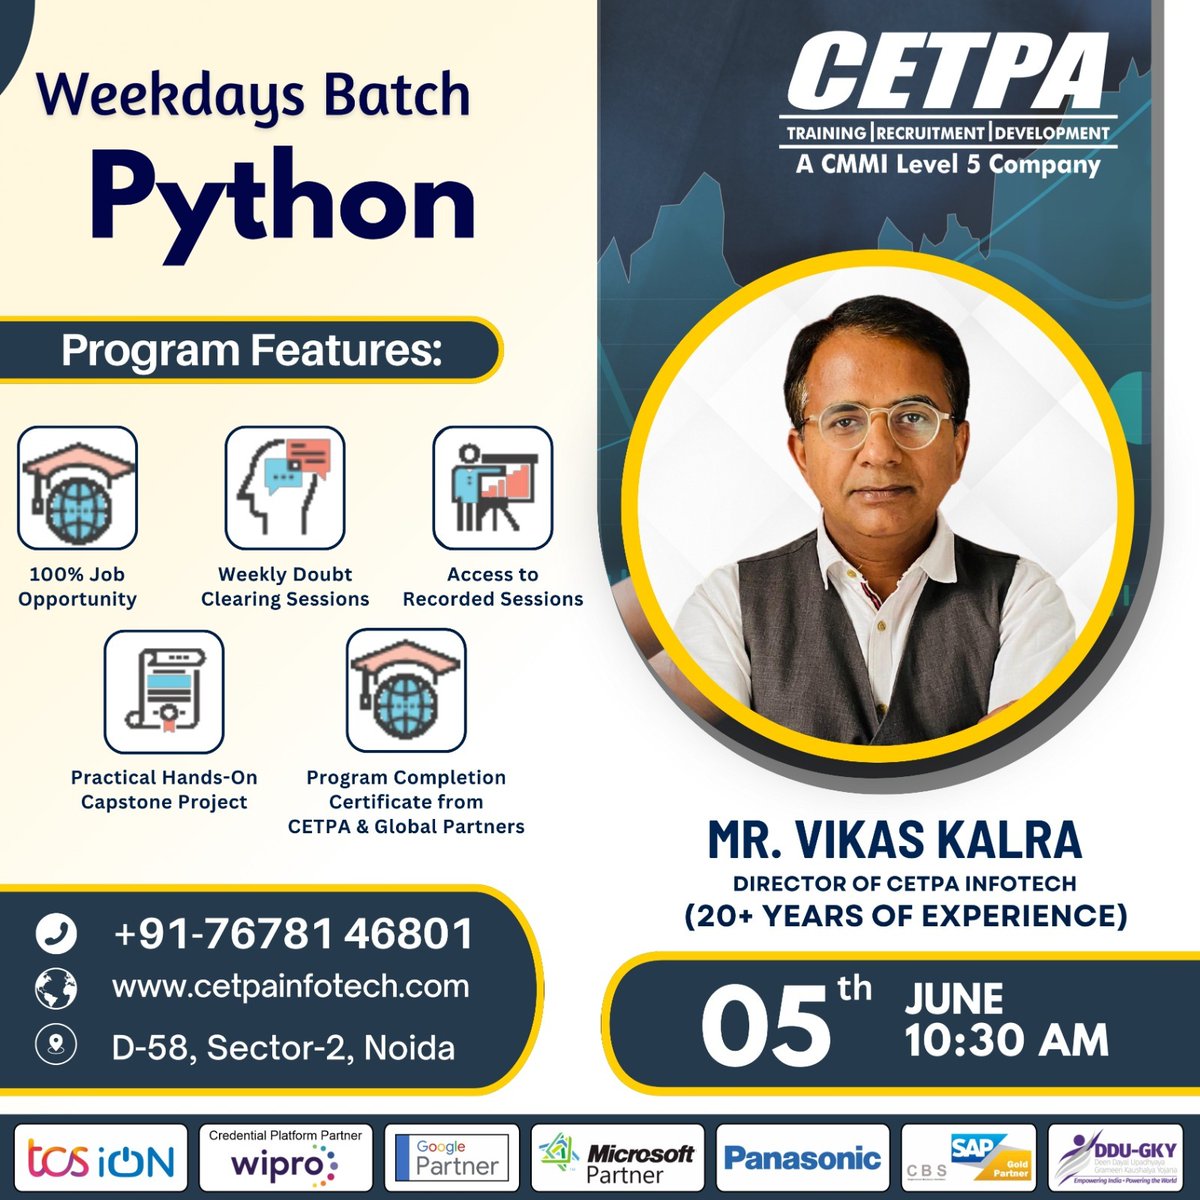 Join our Weekdays Python Batch starting from 5th June at 10:30 AM.

Book your FREE demo now:- forms.gle/jto5qpnuEXYuWD…
.
.
#cetpainfotech #PythonCourse #LearnToCode #Programming #WeekdaysBatch #CodingBootcamp #PythonProgramming #TechSkills #PythonLearning #CodingLife